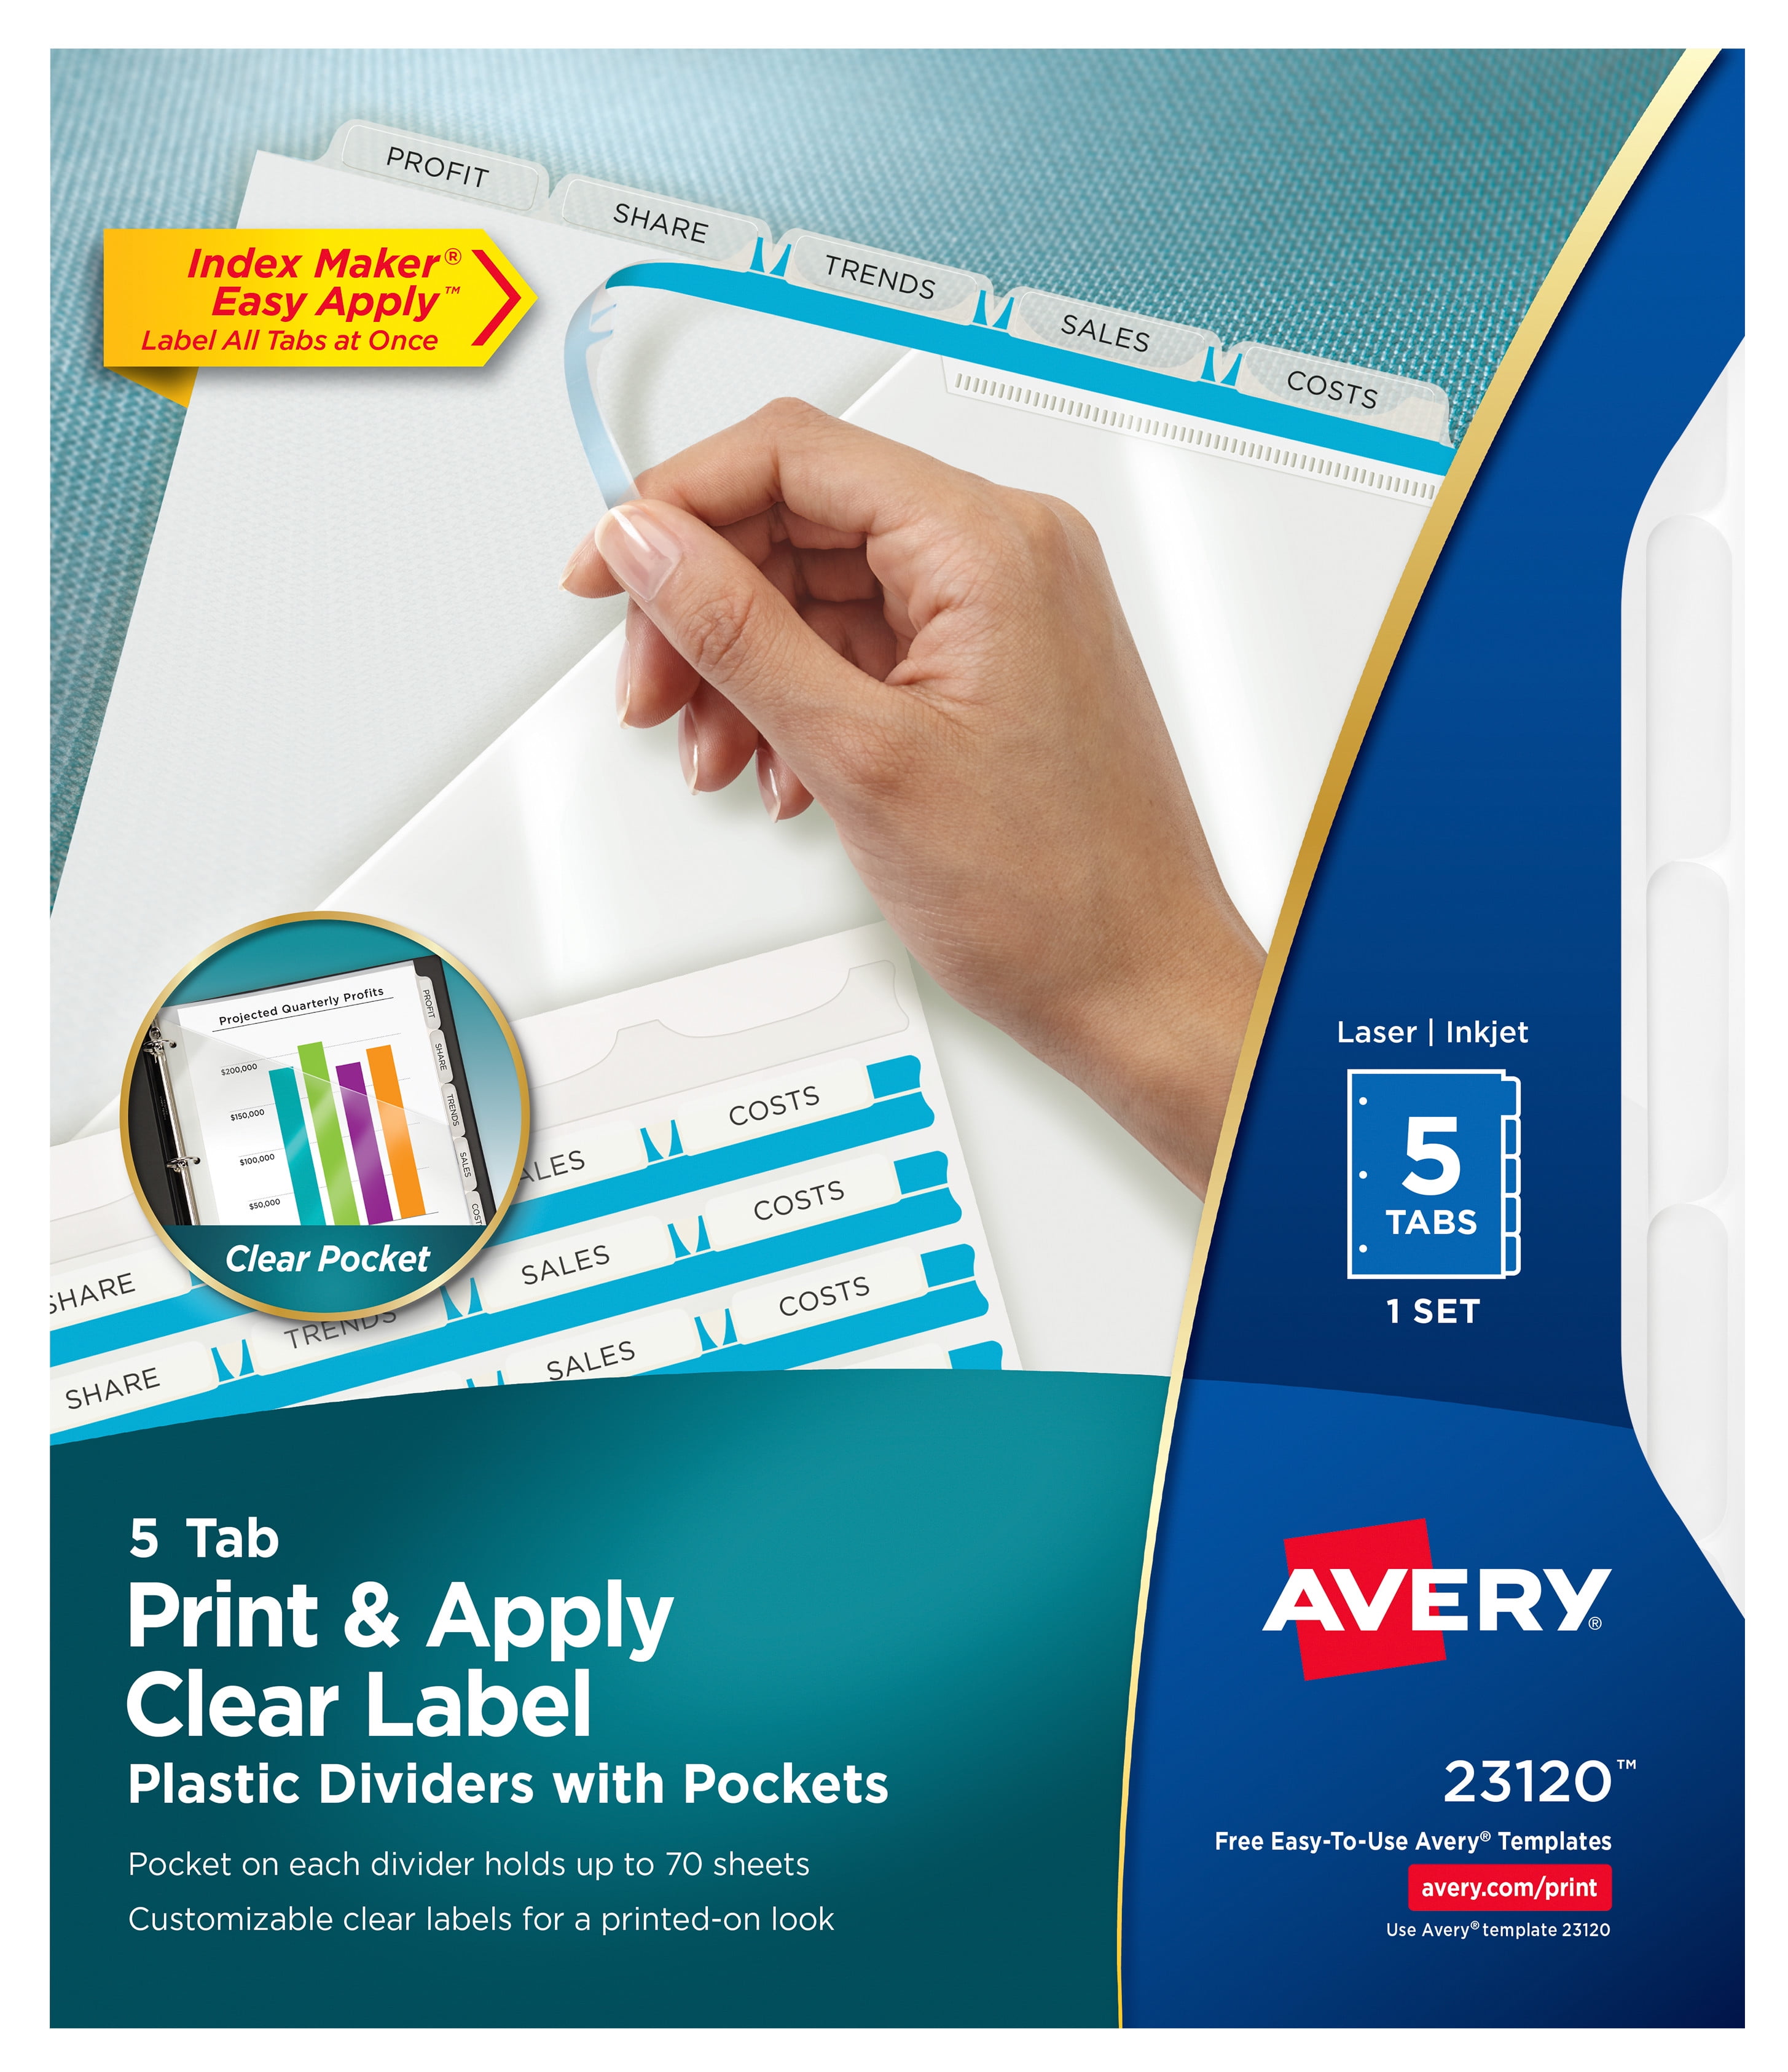 avery-5-tab-plastic-dividers-with-pockets-easy-print-apply-clear